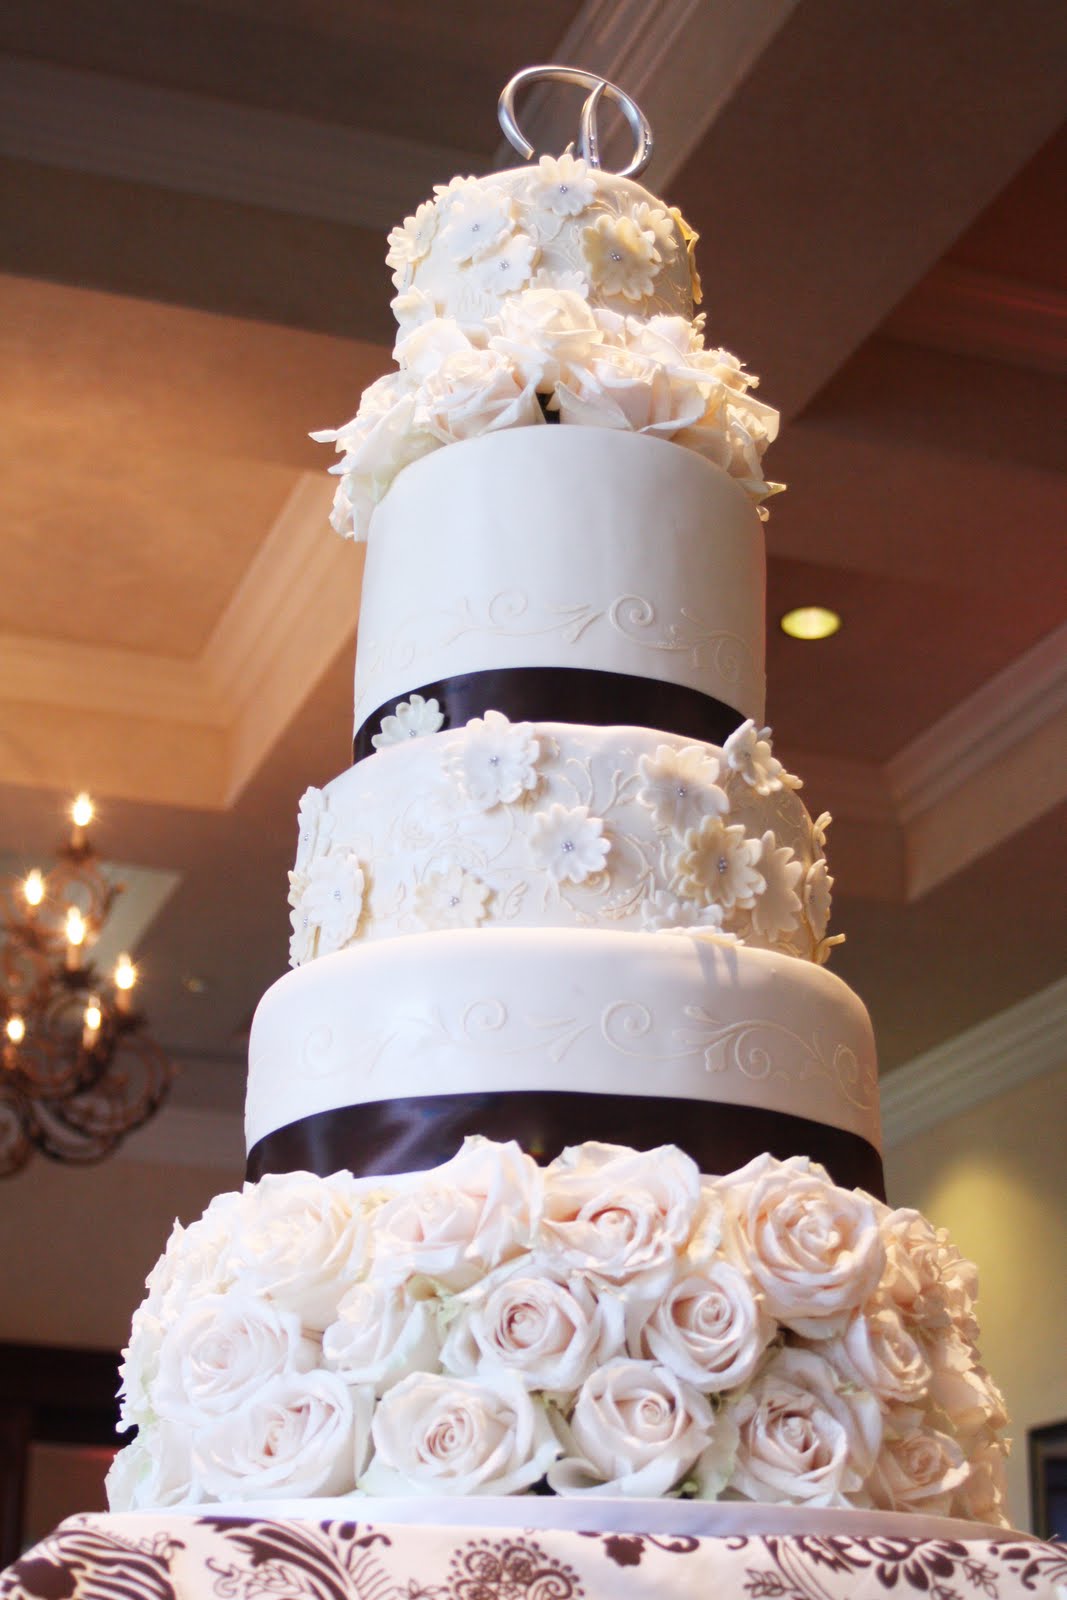 beautiful white wedding cakes This wedding cake was designed after the brides wedding dress. The 